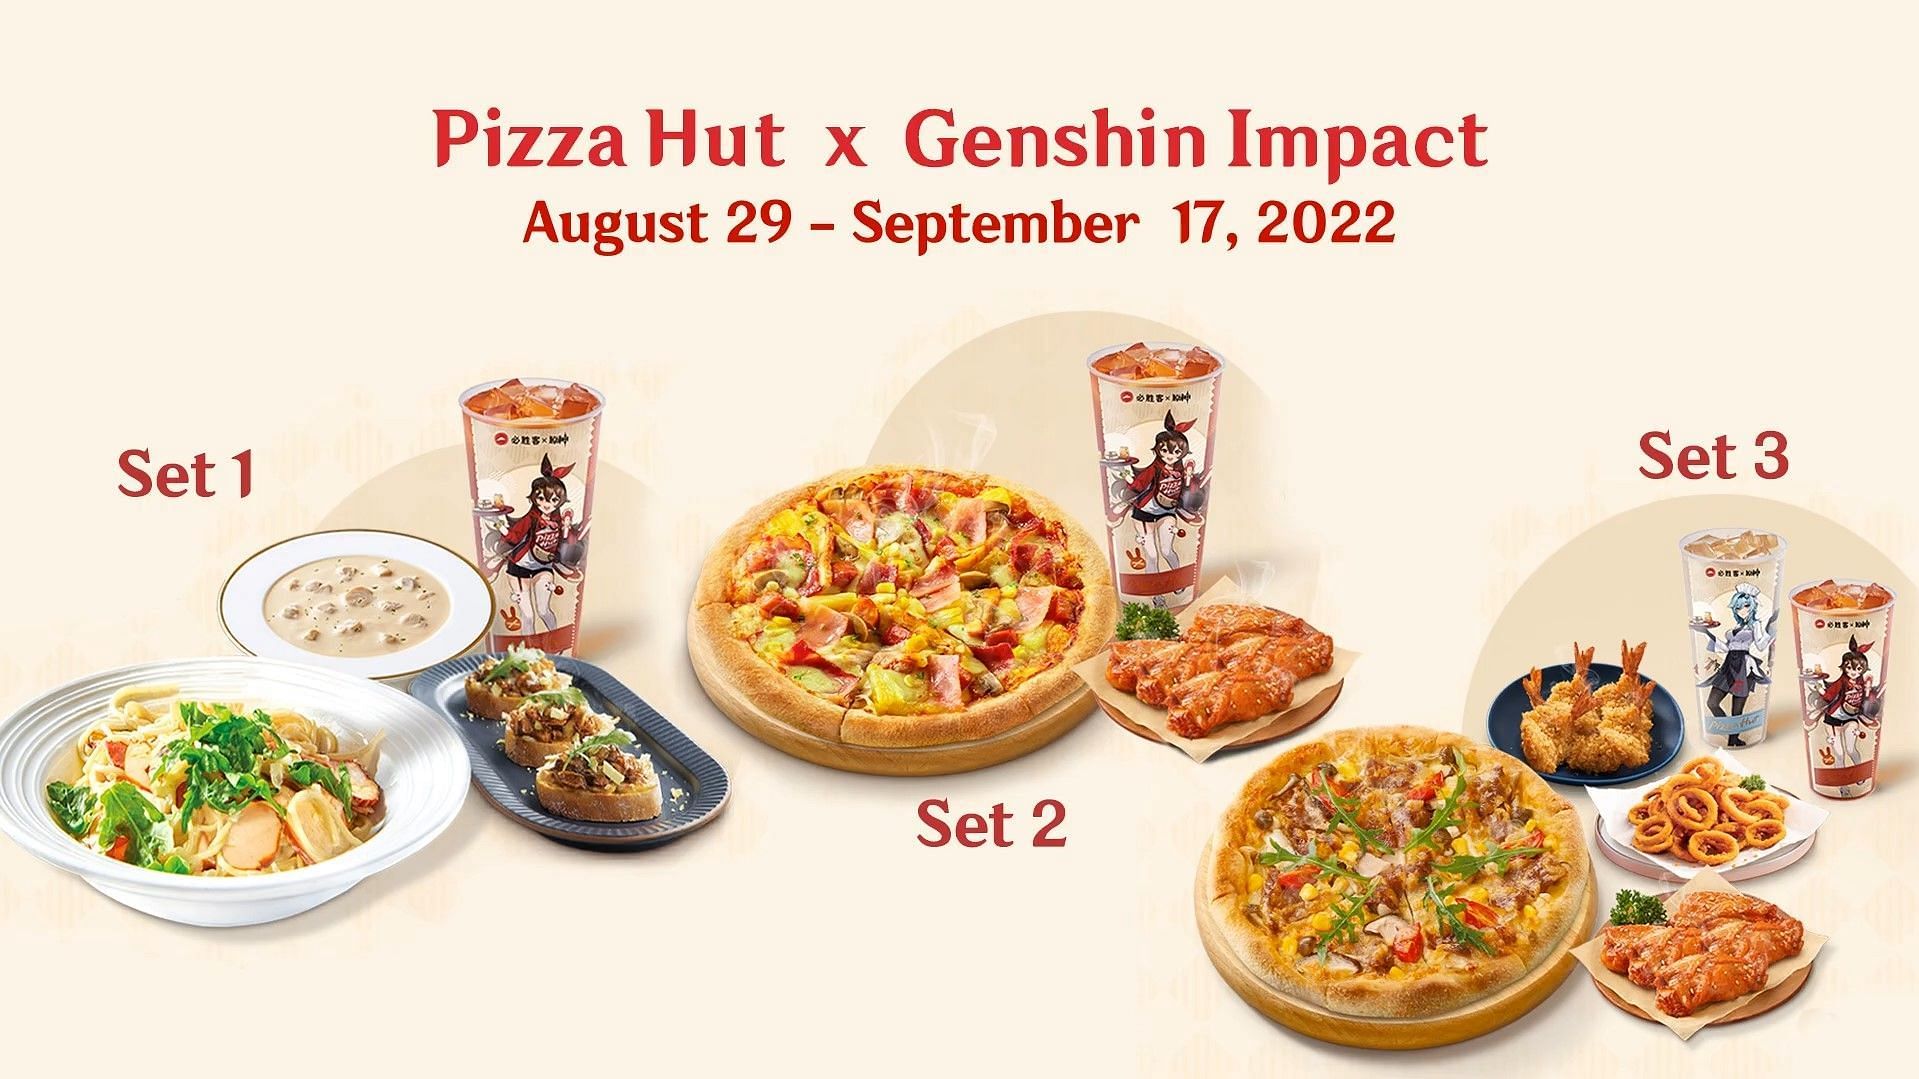 Genshin Impact x Pizza Hut collab features Amber, Eula, and limited